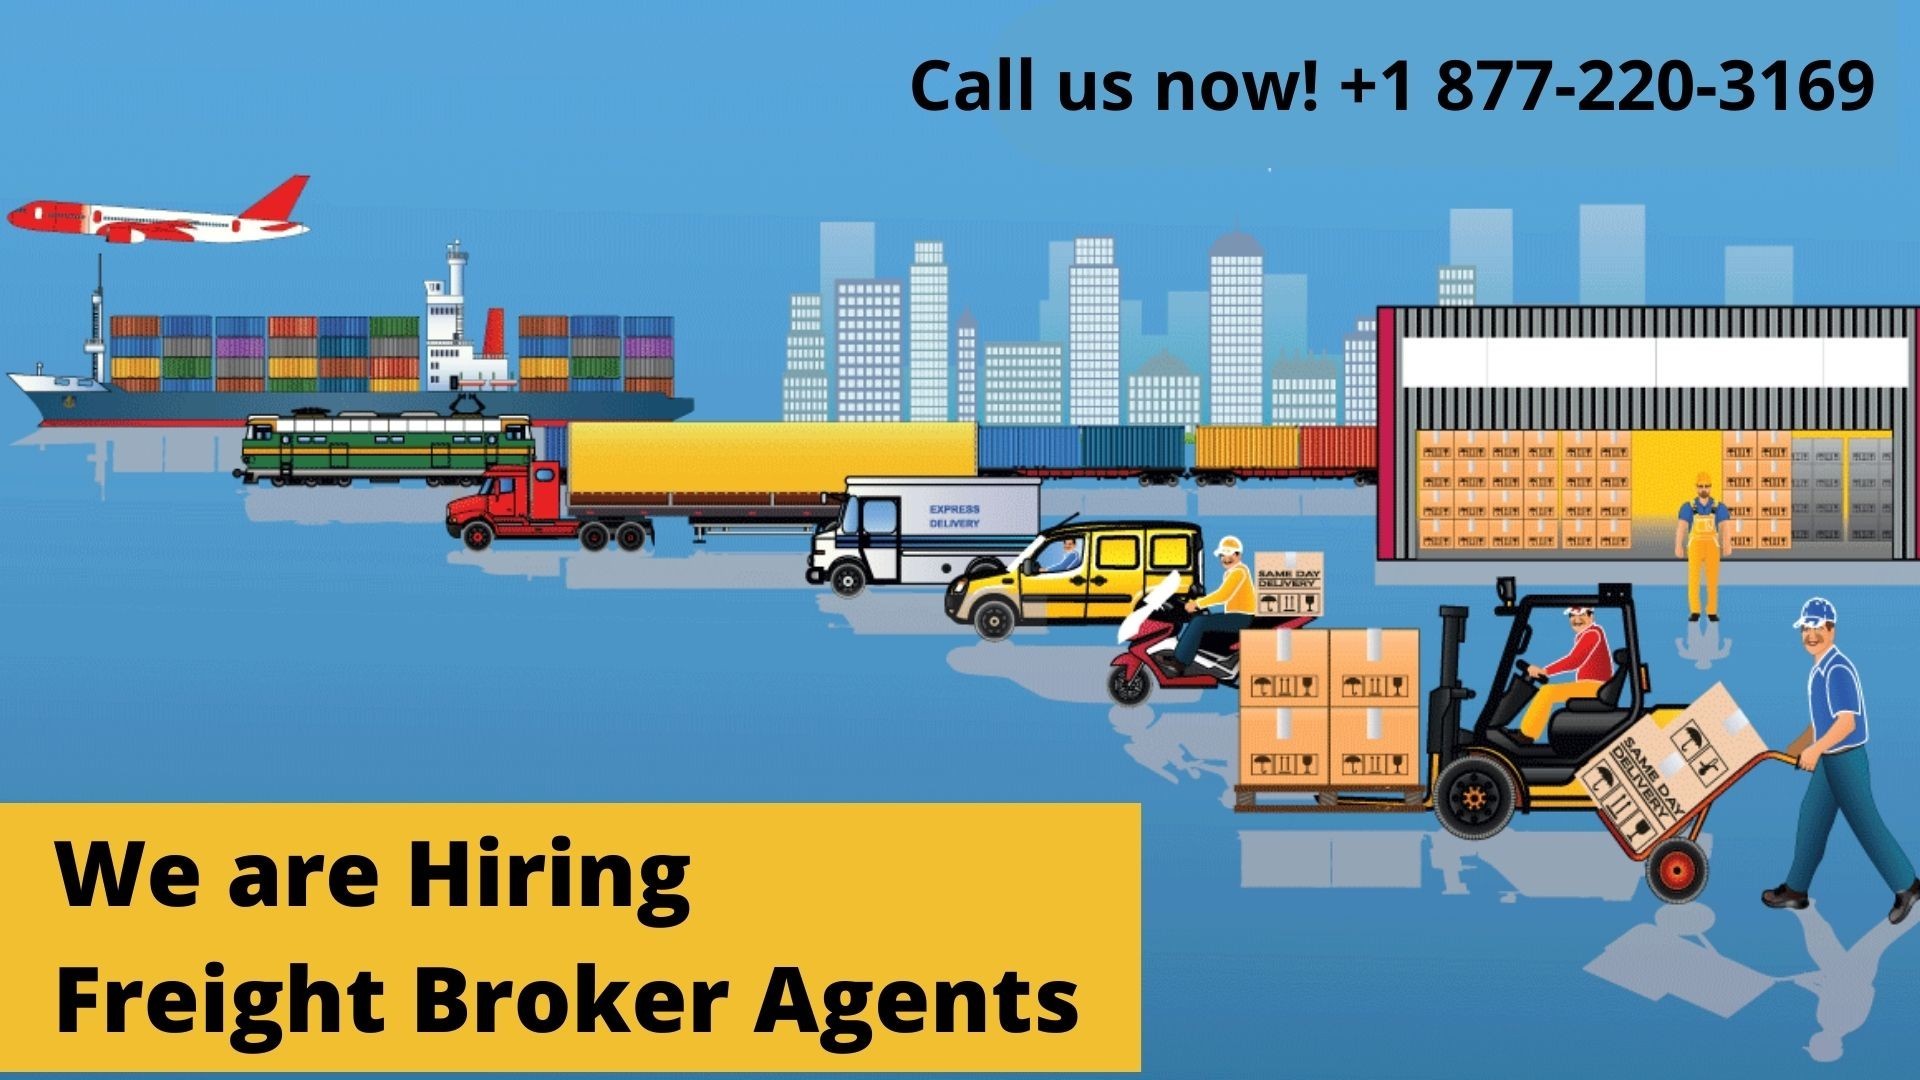 We are Hiring Freight Broker Agents